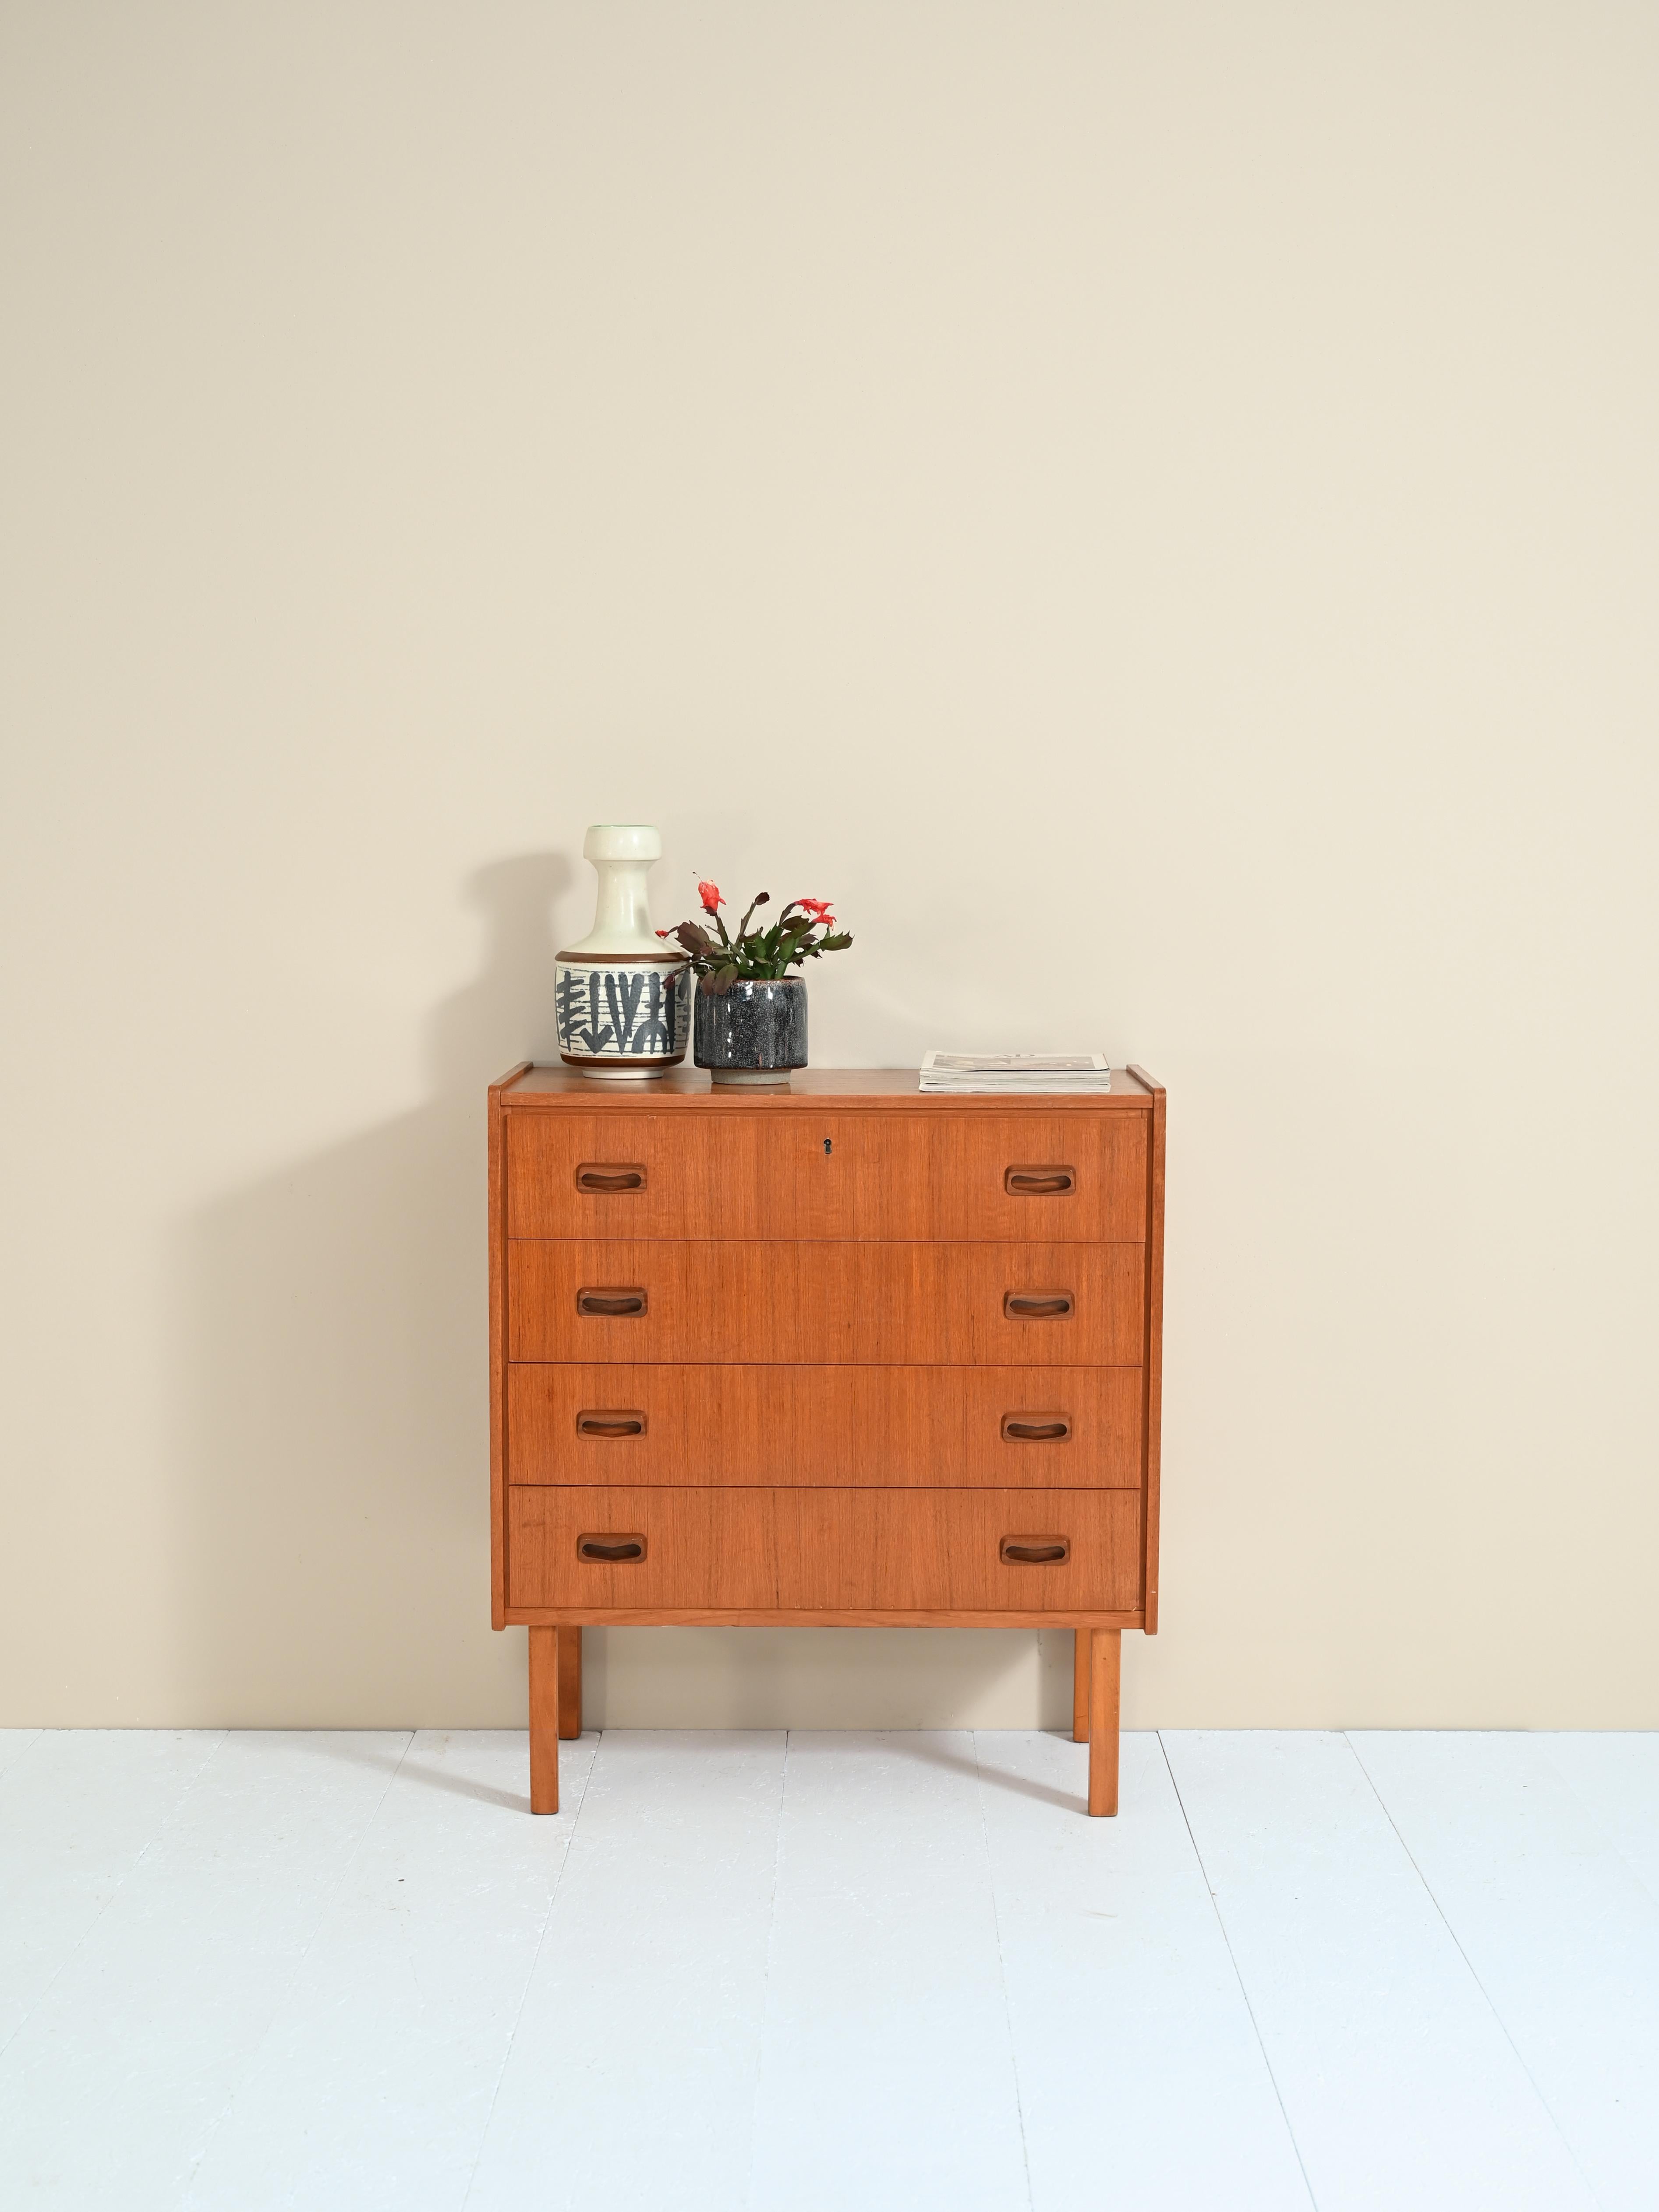 Vintage Scandinavian-made cabinet with four drawers equipped with lock and carved wooden handle.

The classic shapes and pronounced teak wood grain make this chest of drawers a timelessly beautiful piece of furniture.

Good vintage condition. A